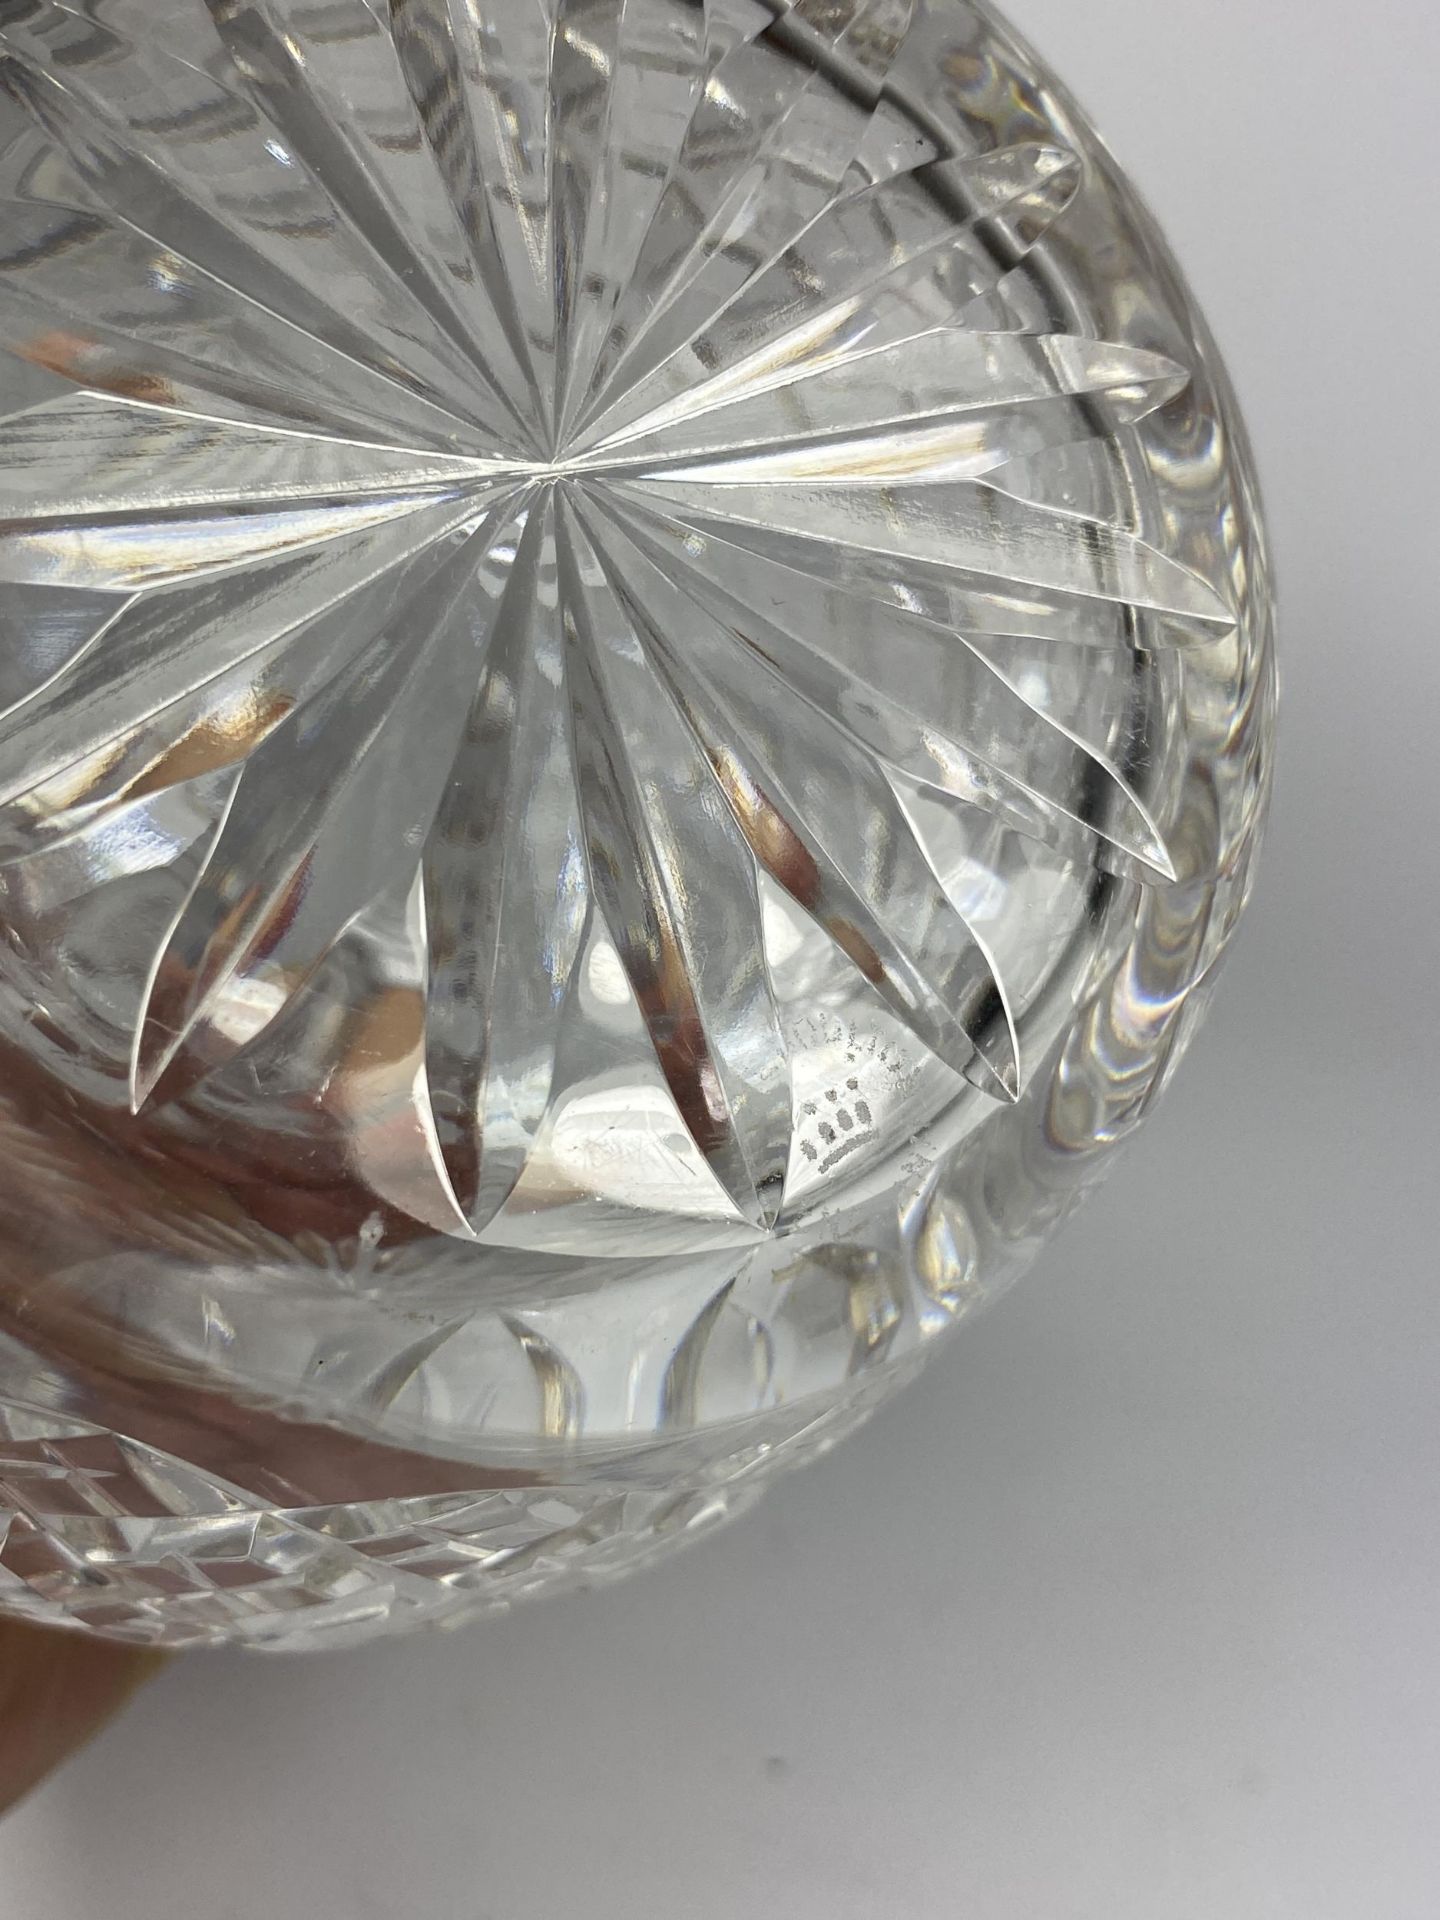 A ROYAL DOULTON CUT GLASS DECANTER - Image 2 of 2